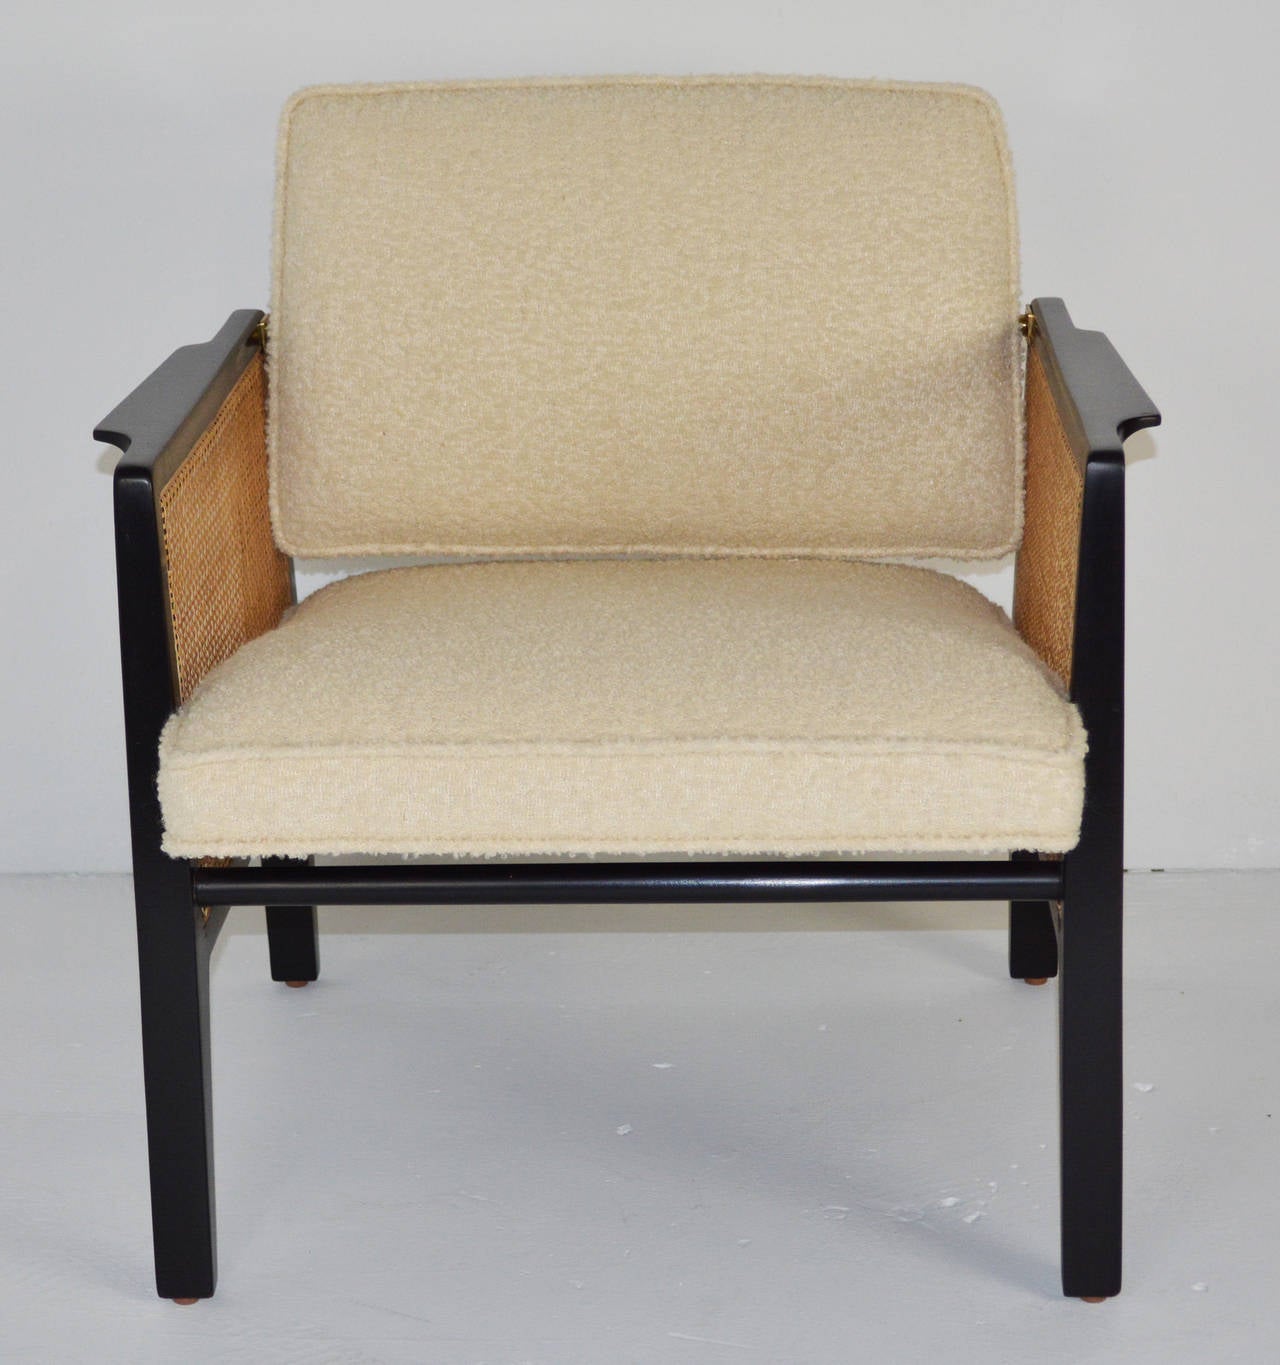 Armchair Model 5513 by Edward Wormley for Dunbar. Pivoting back and sculpted seat make for a comfortable small scale chair. Caning has been replaced and the chair newly upholstered in ivory wool boucle.